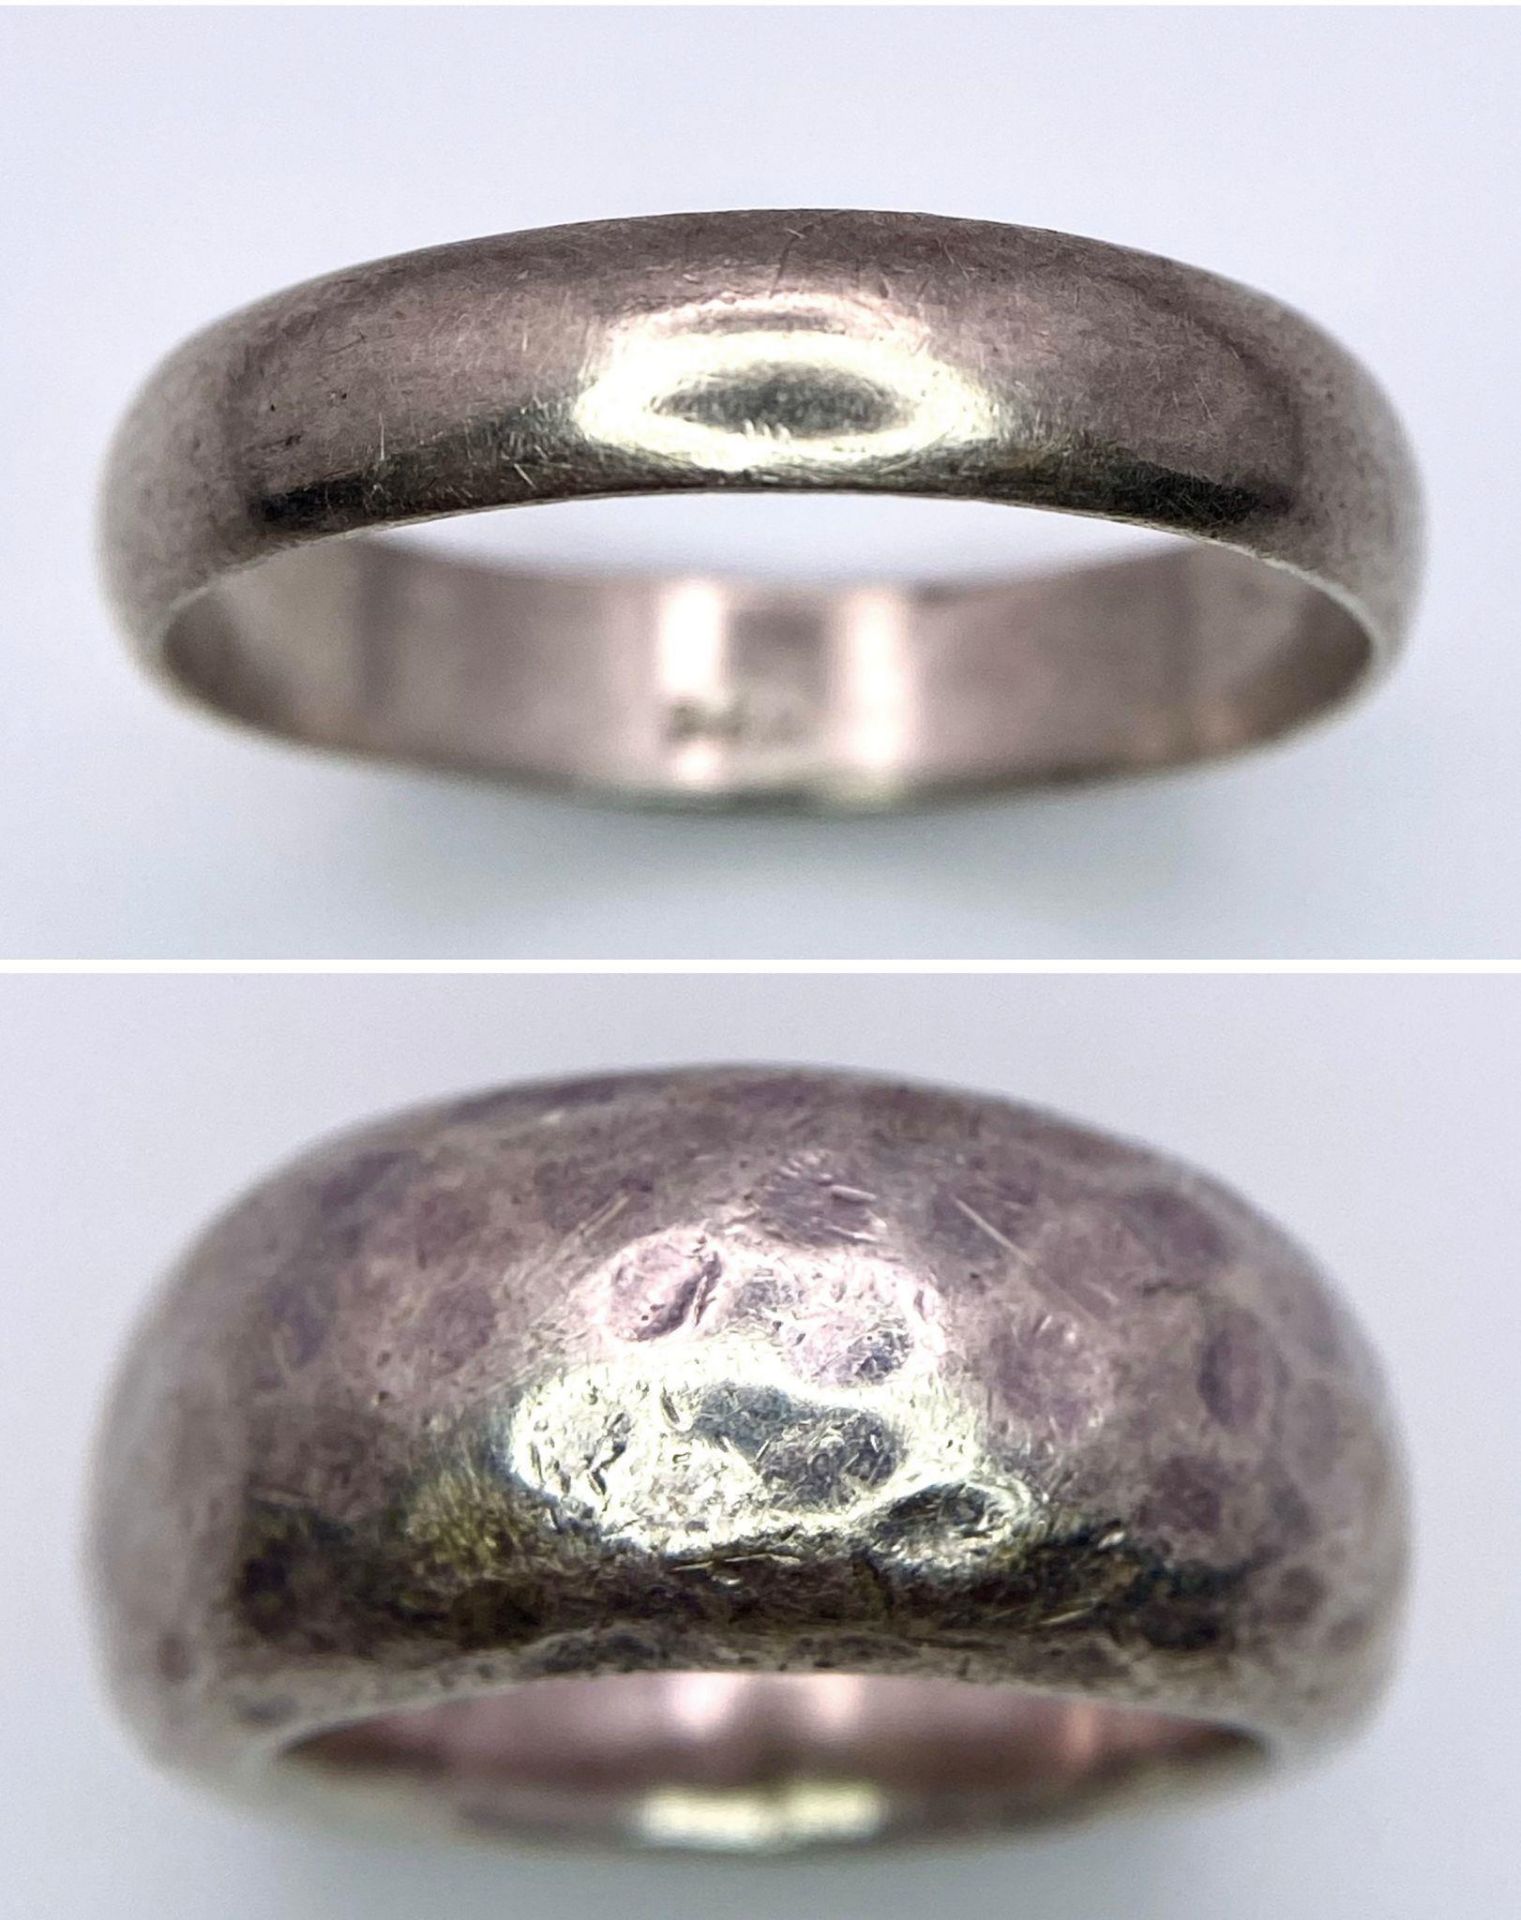 2X 925 silver band rings. Total weight 16.4G. Both sized X.